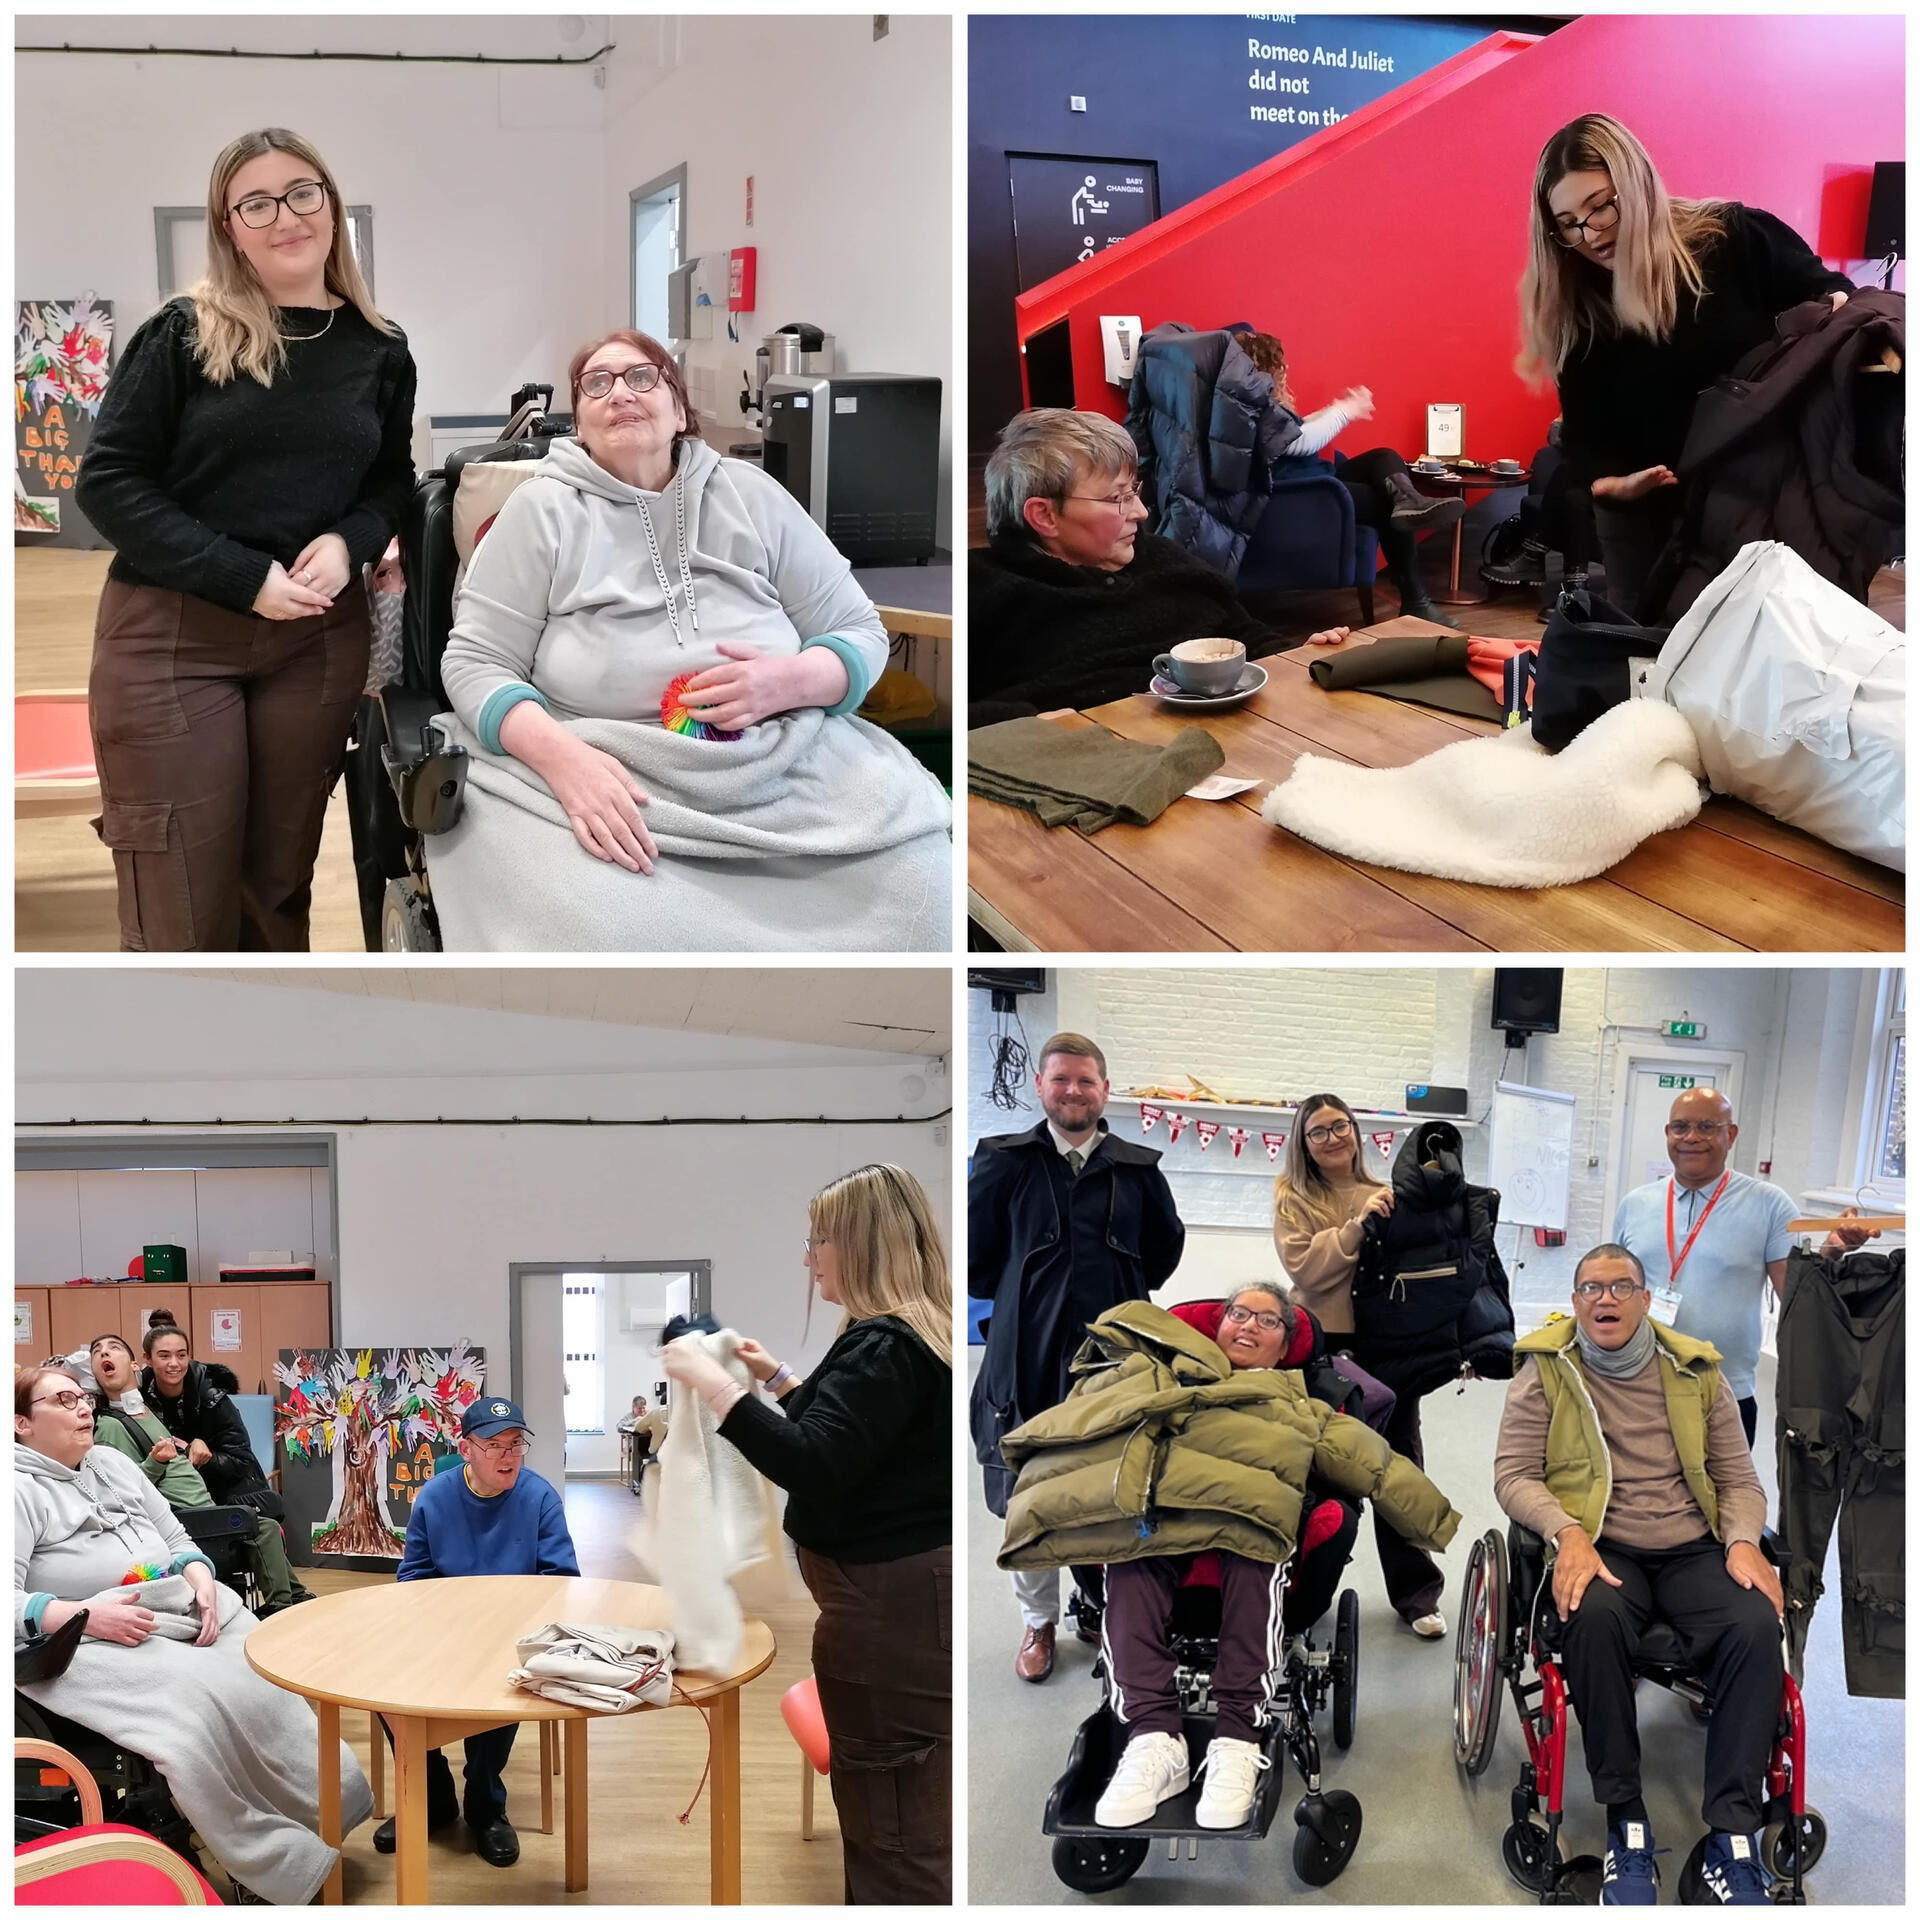 compostie of four images of designer Hannan Tantush from intotum with disabled people trying clothes designs that are adaptive